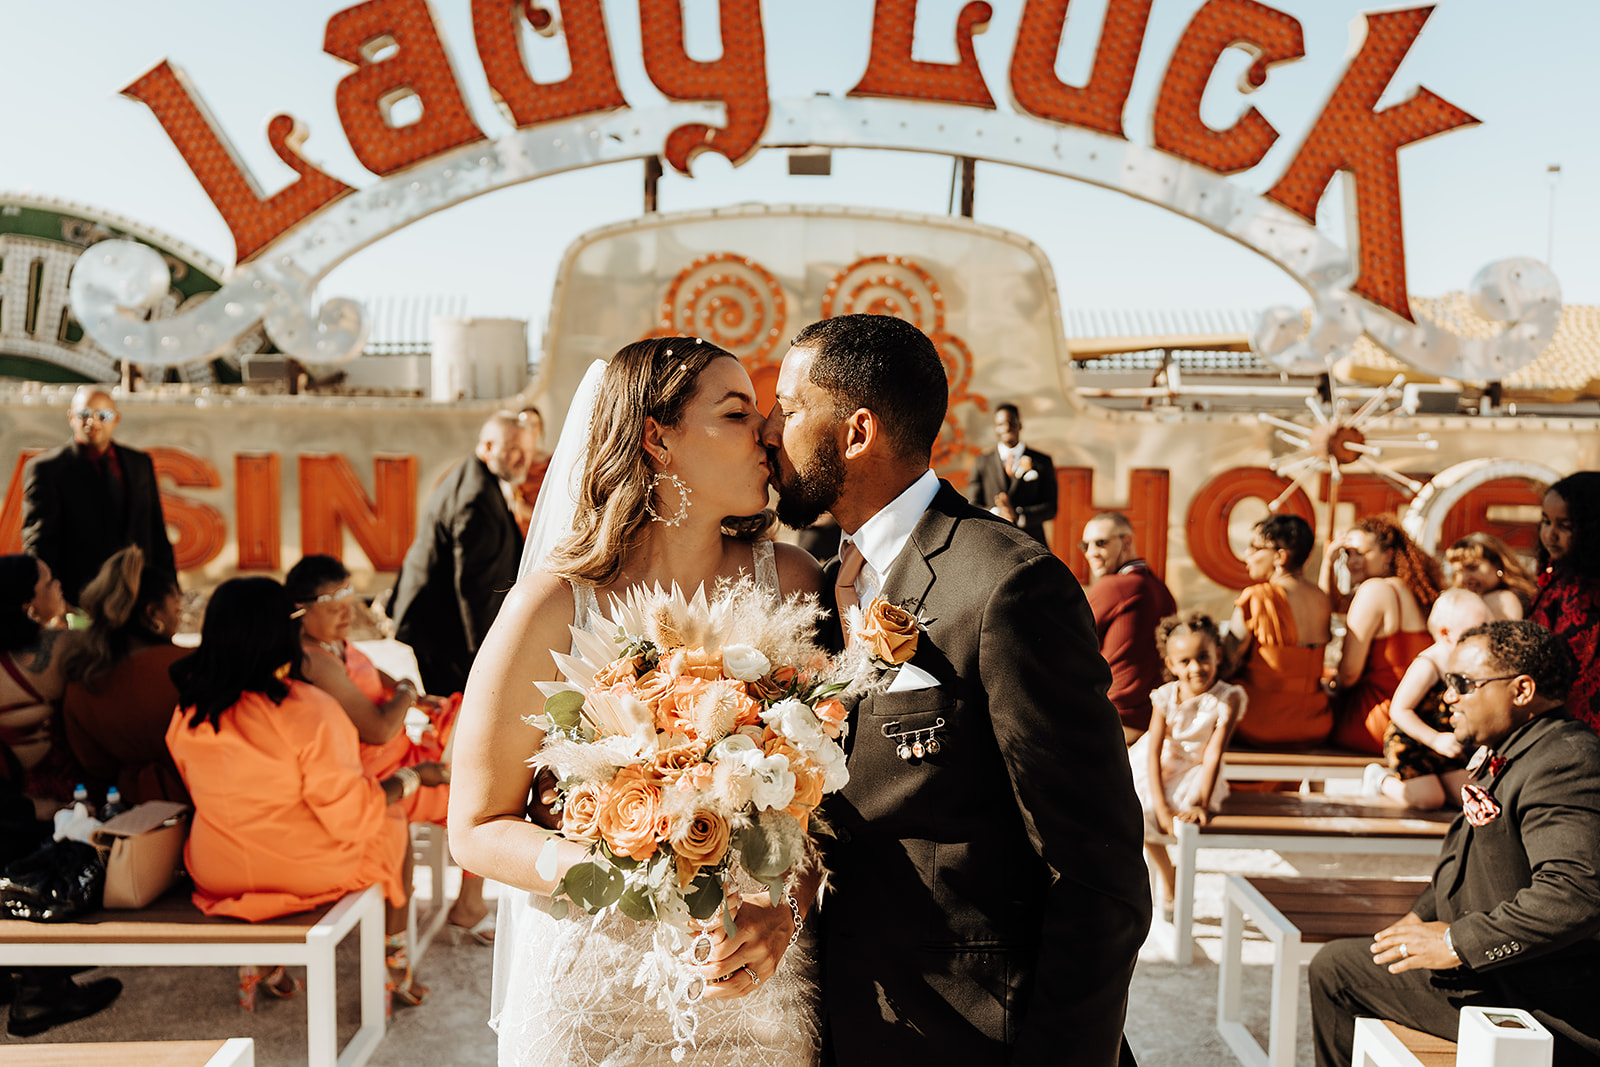 Couple sharing a kiss during their wedding ceremony at the Neon Museum arranged by Elopement Las Vegas